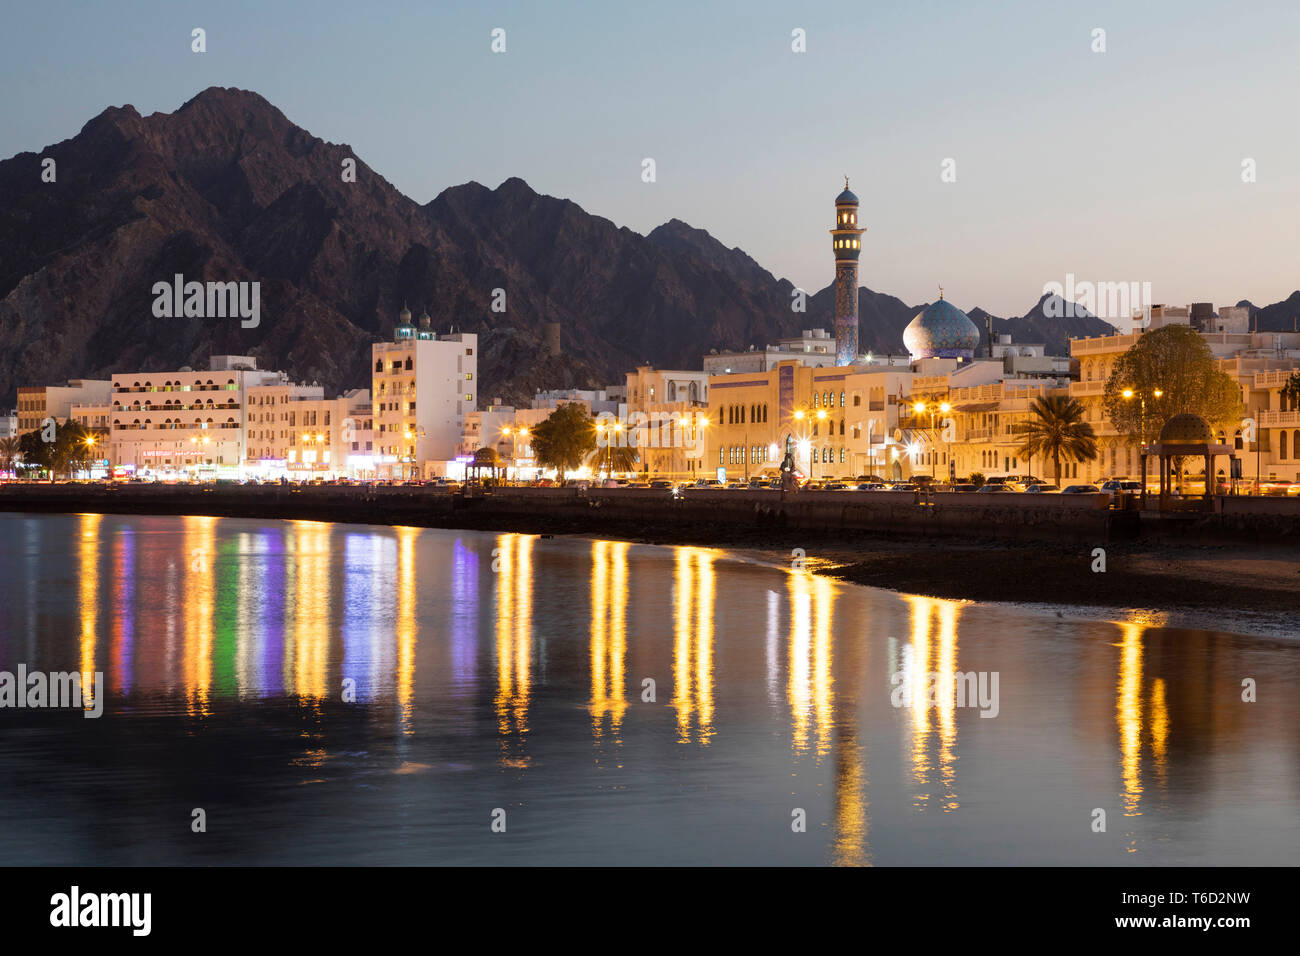 Middle East, Oman, Muscat. The Muttrah Corniche at night Stock Photo